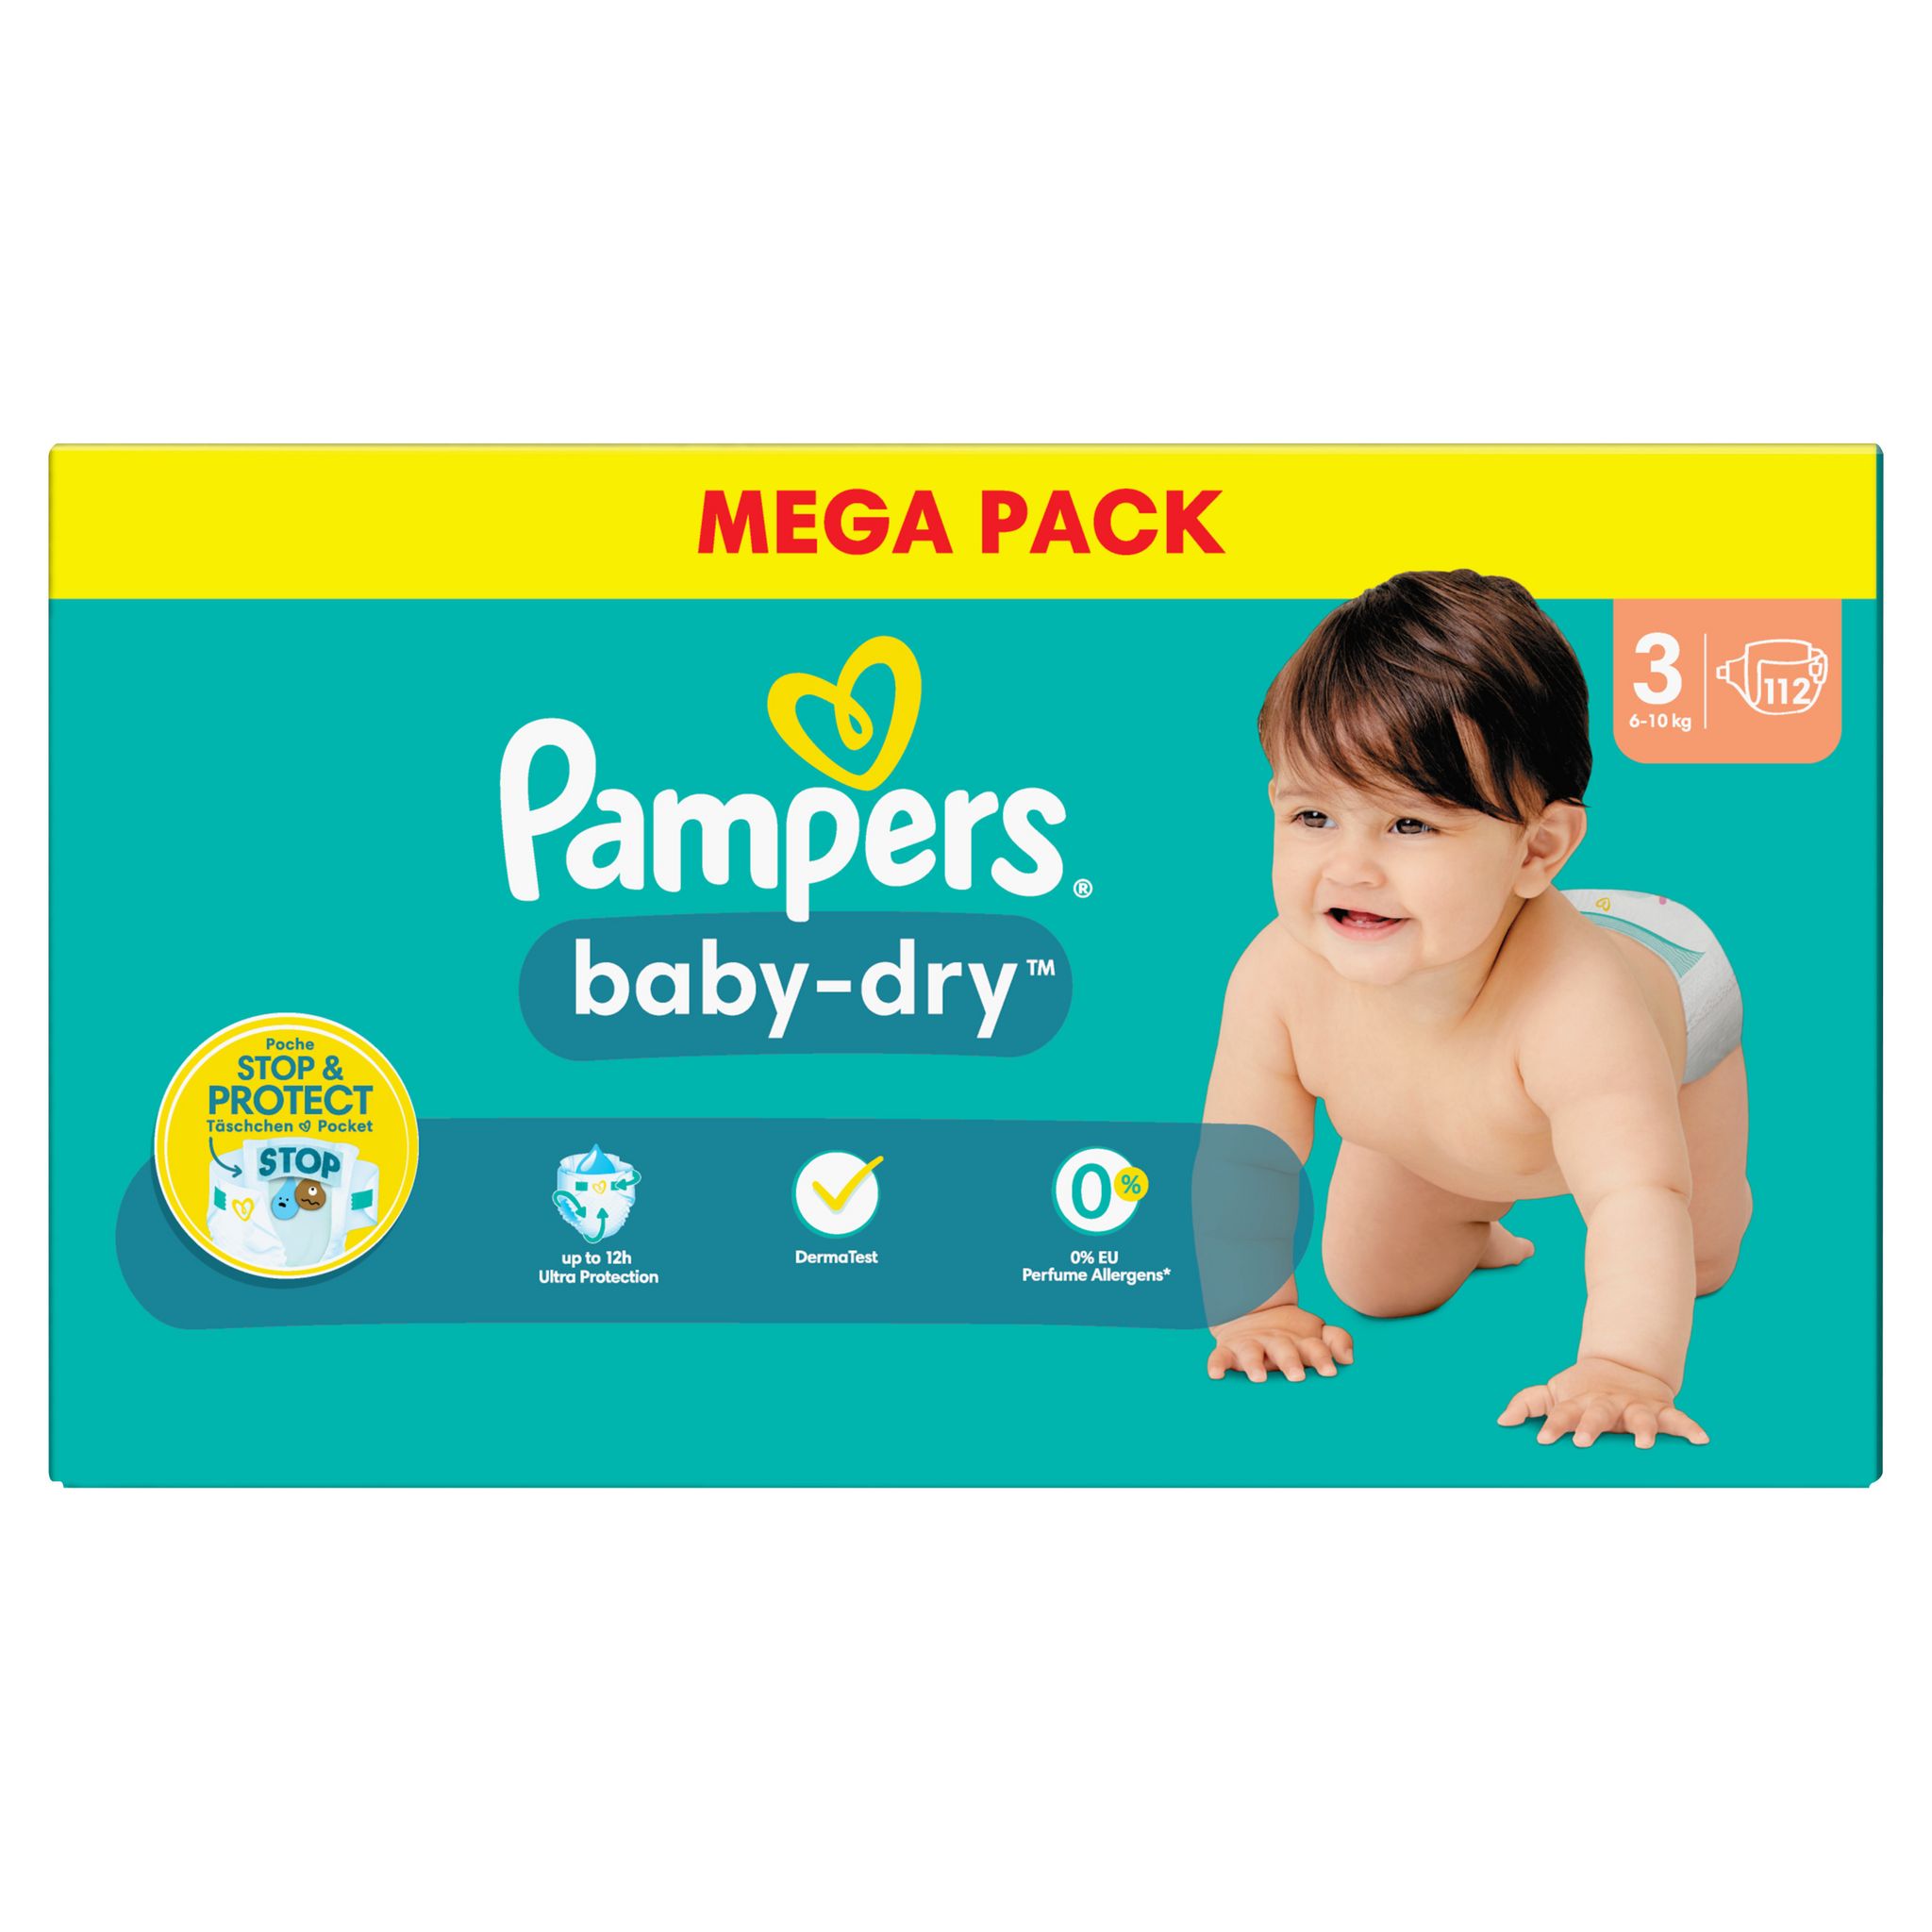 PAMPERS Baby-dry couche taille 3 ( 6-10kg ) 104 couches pas cher 